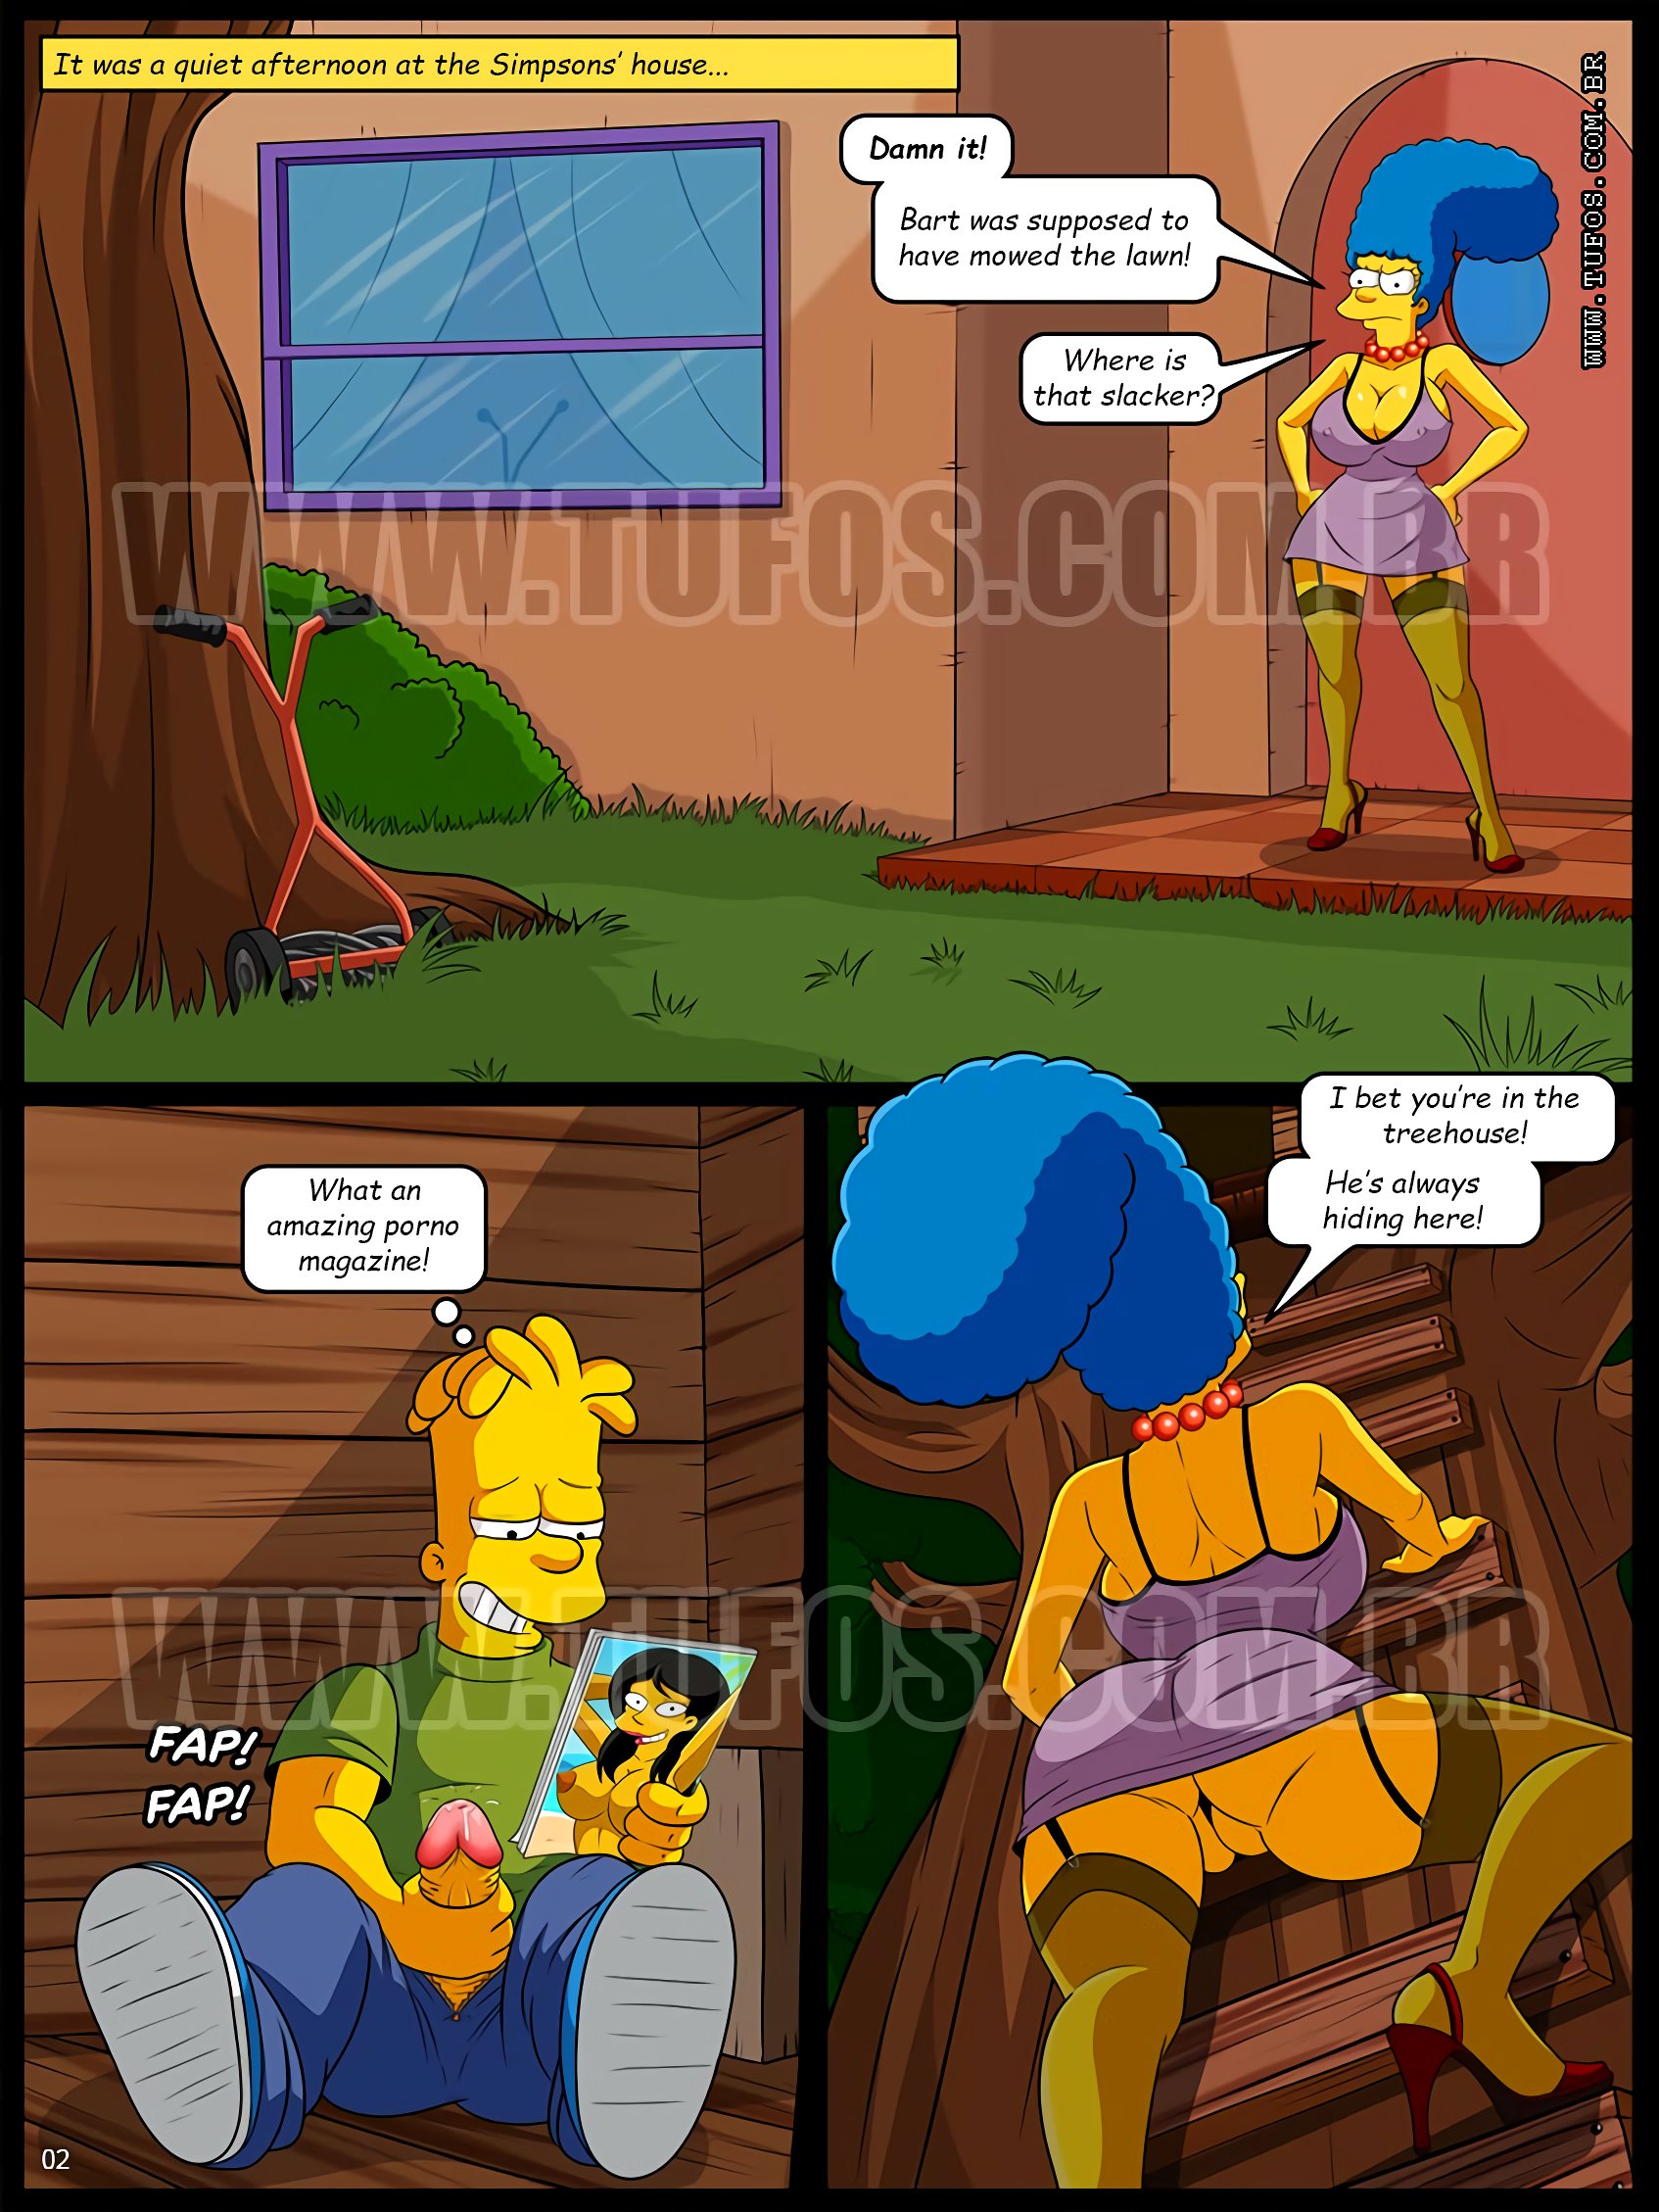 Simpsons Xxx - The simpsons in climbing the tree house english porn comics â¤ï¸ Best adult  photos at comics.theothertentacle.com